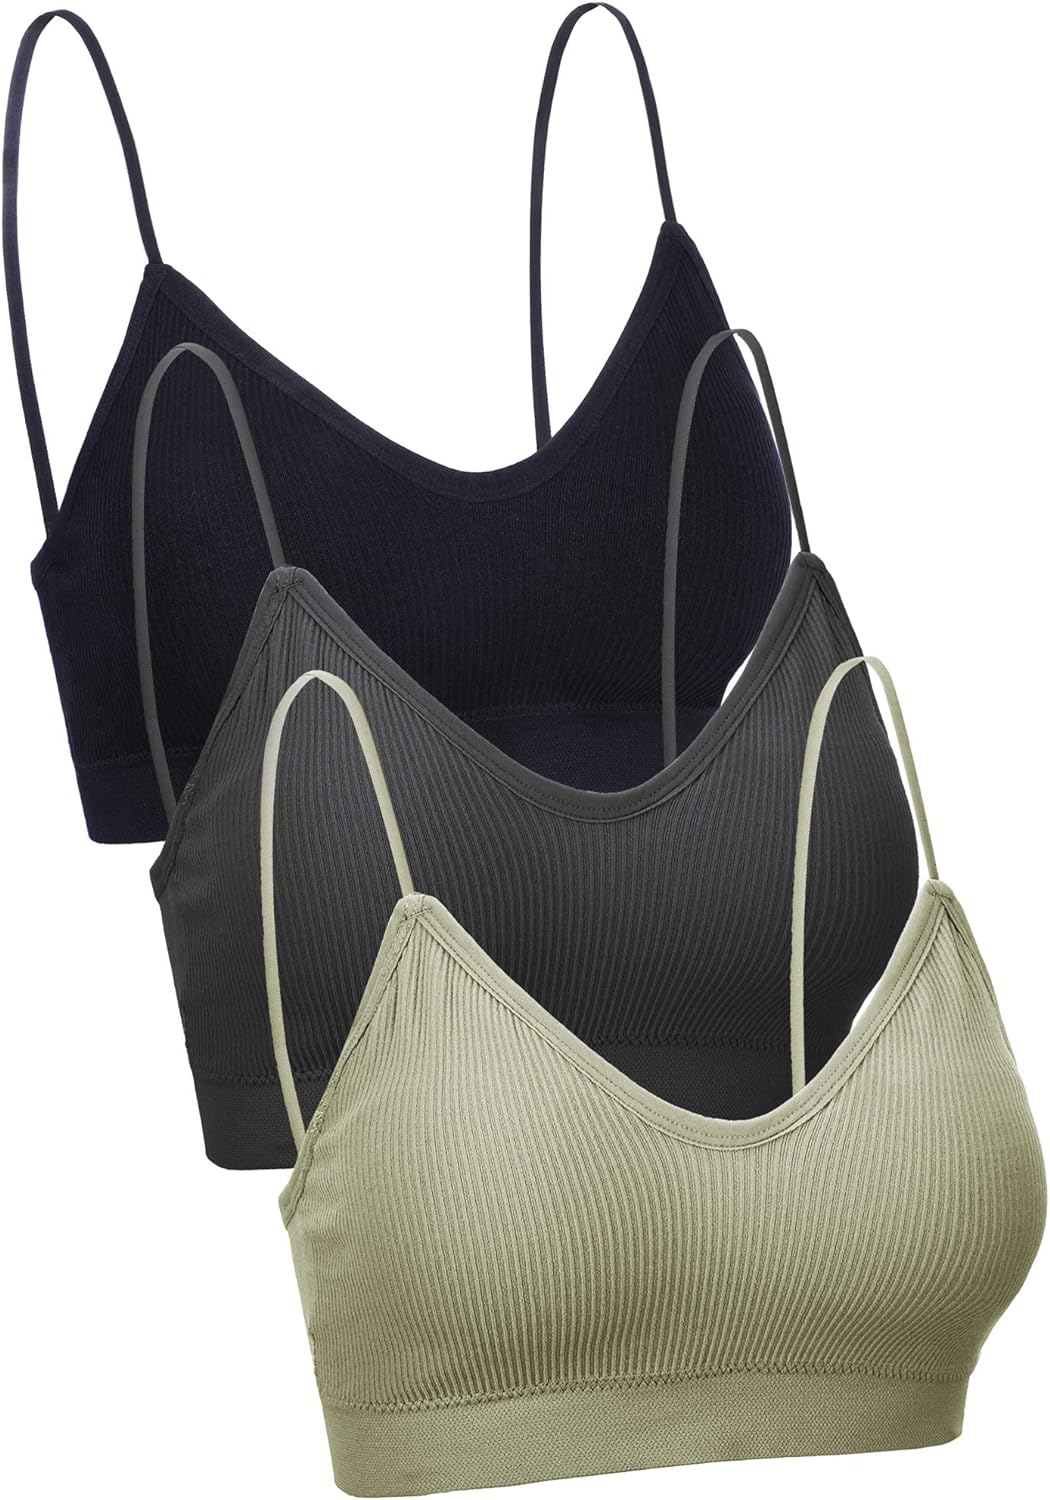 3 Pieces V Neck Women Bra Seamless Padded Camisole Bandeau Tube Bra with Elastic Straps